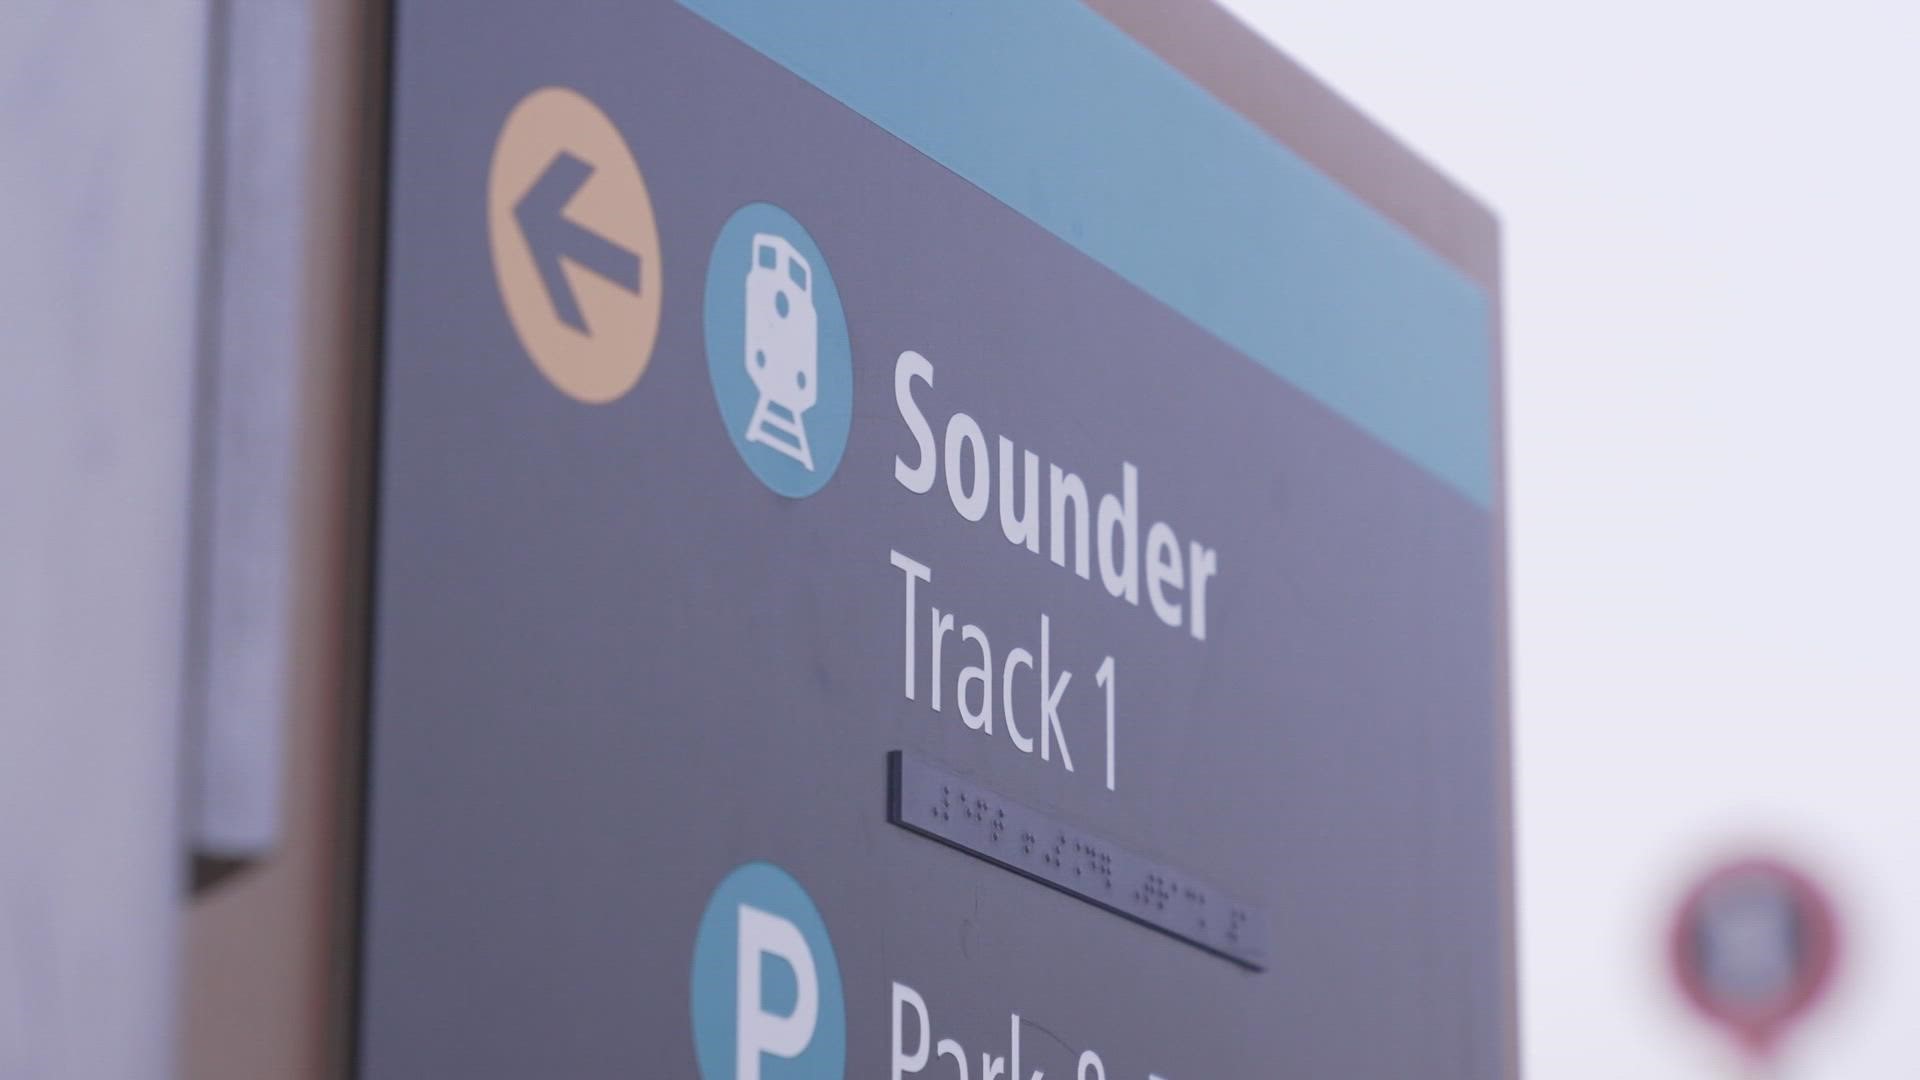 In 2022, the Sounder saw about one-third of the ridership levels than before the pandemic in 2019. KING5 talked with commuters about the changes they’ve noticed.